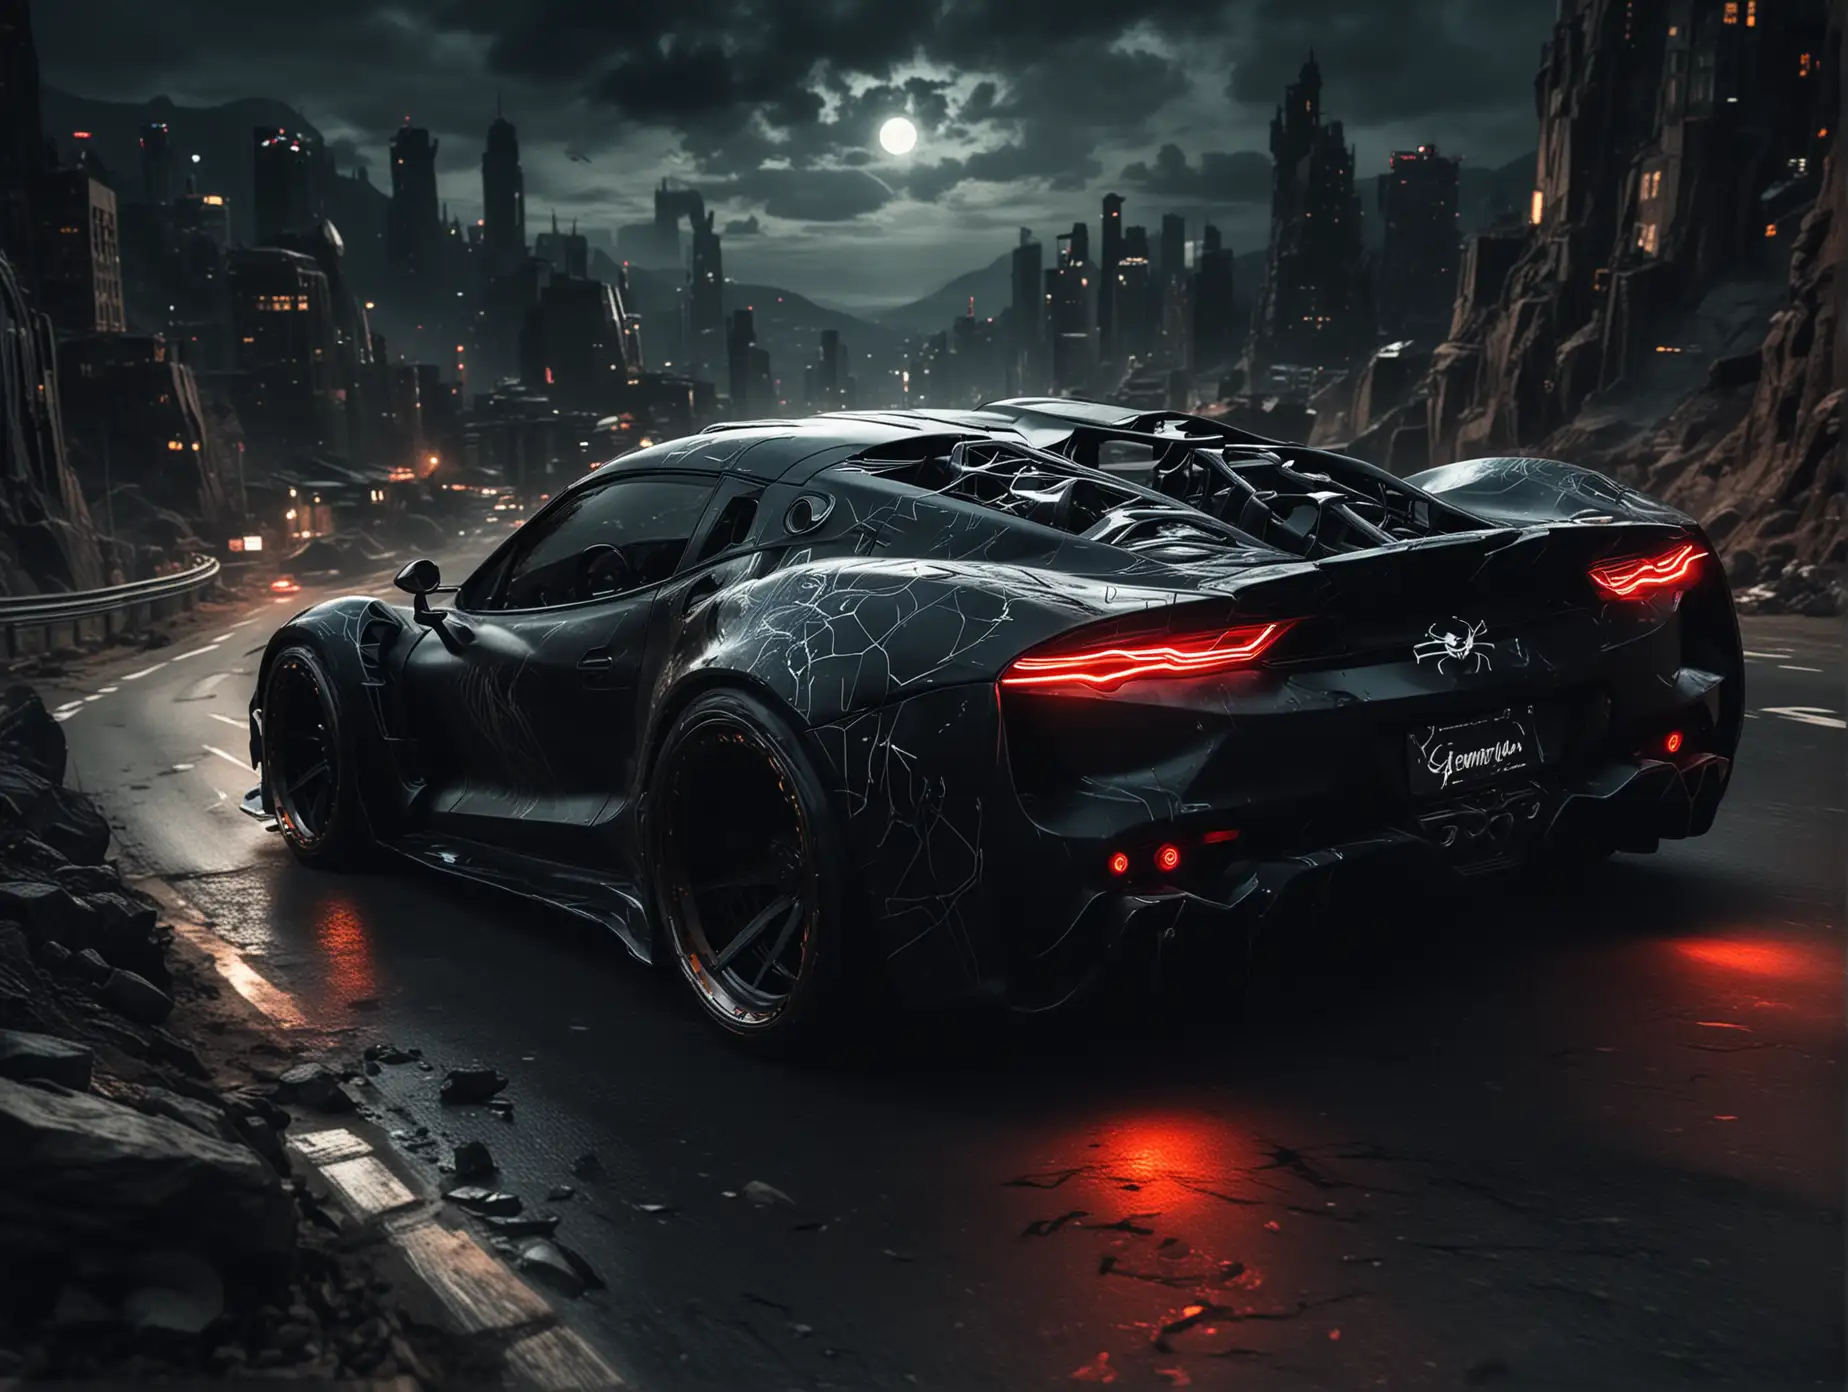 Create  futuristic cars from  Spiderman with venom evil tuning drifting  at night on Downhill  rear view from far away  car color black dark